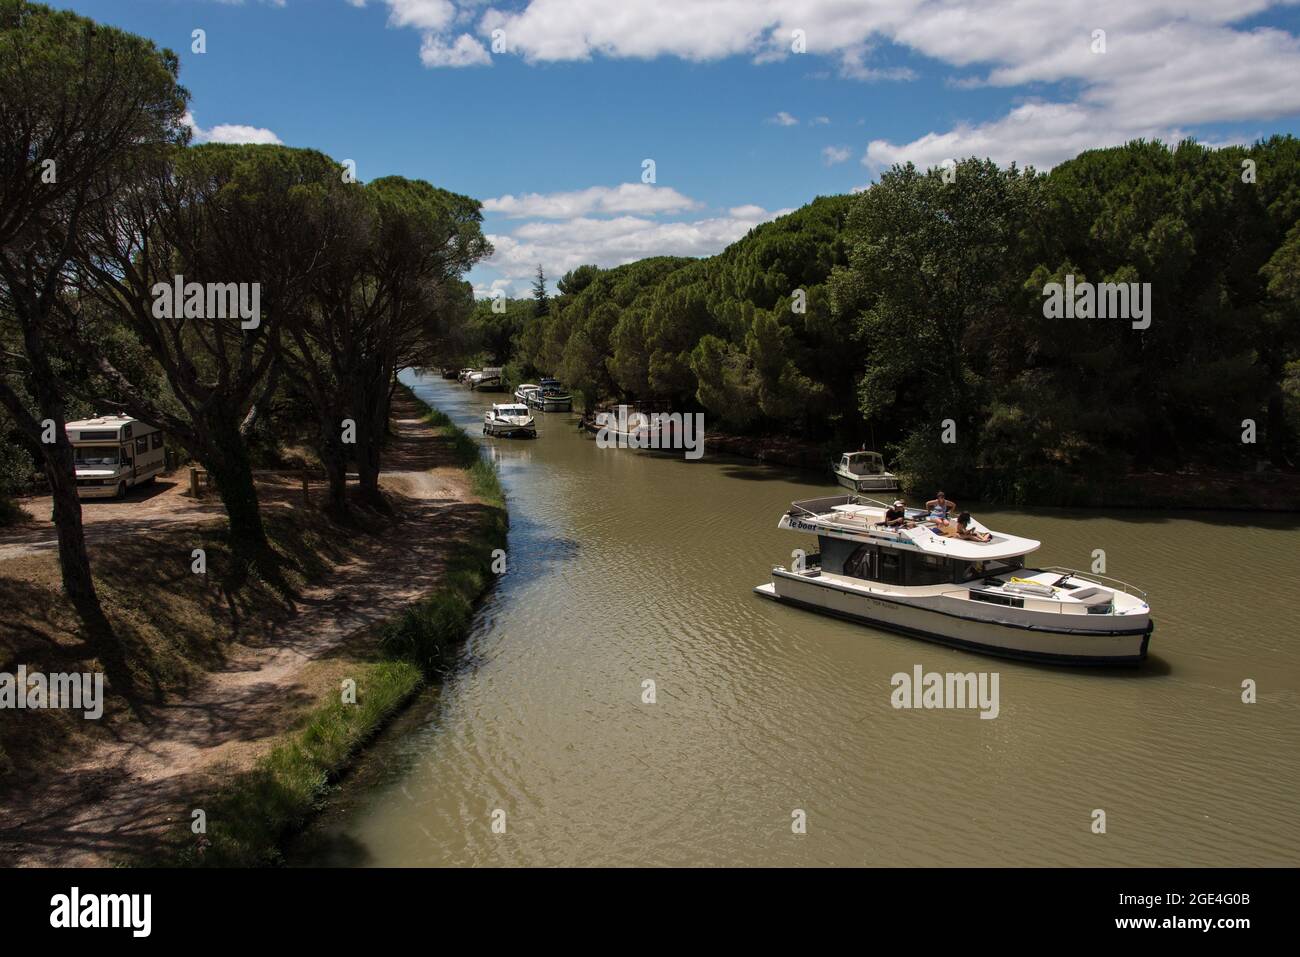 Rental boats form the bulk of traffic on the Canal du Midi Stock Photo